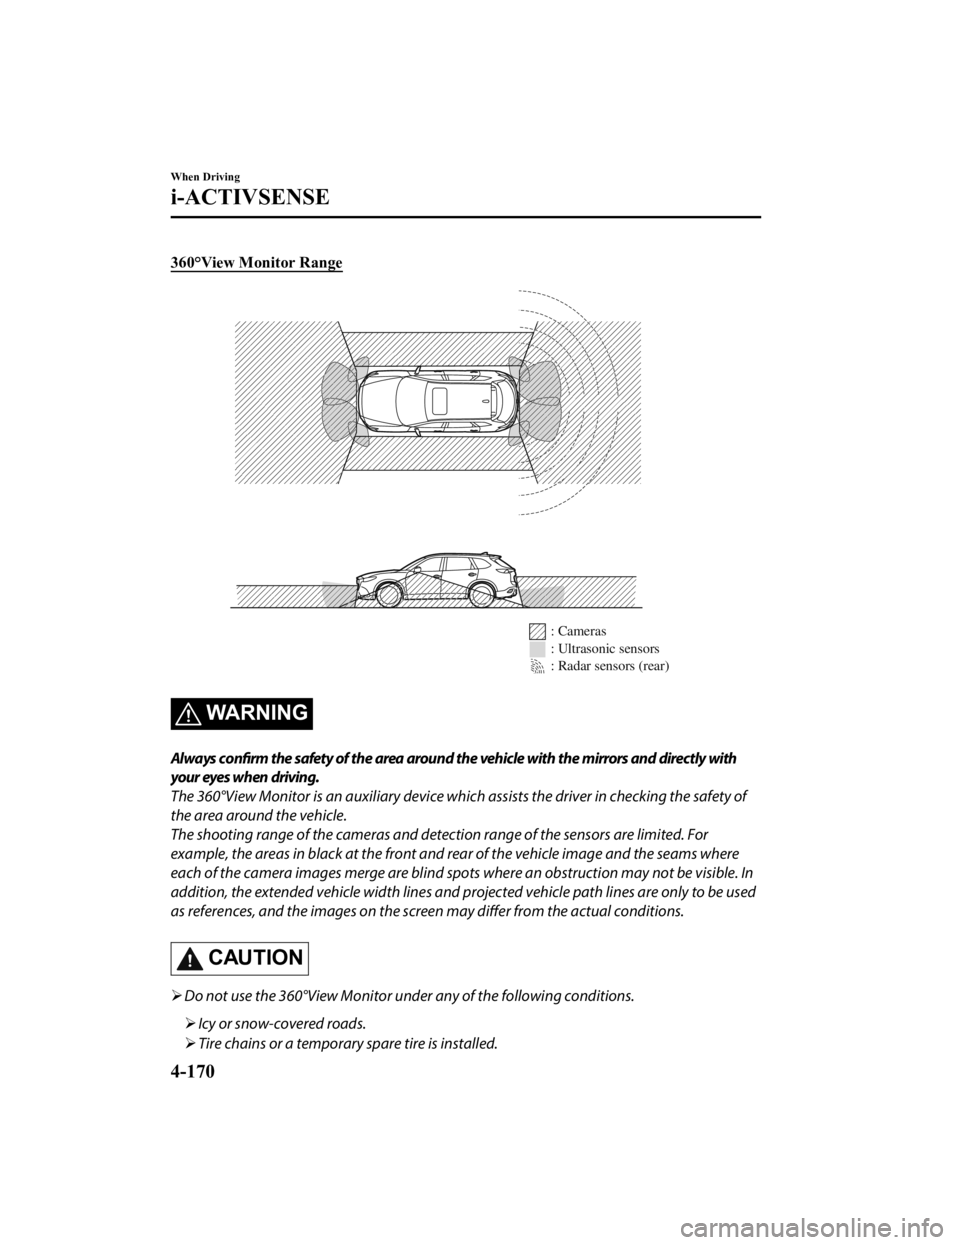 MAZDA MODEL CX-9 2022  Owners Manual 360°View Monitor Range
: Cameras
: Ultrasonic sensors
: Radar sensors (rear)
WA R N I N G
Always confirm the safety of the area around the vehicle with the mirrors and directly with
your eyes when dr